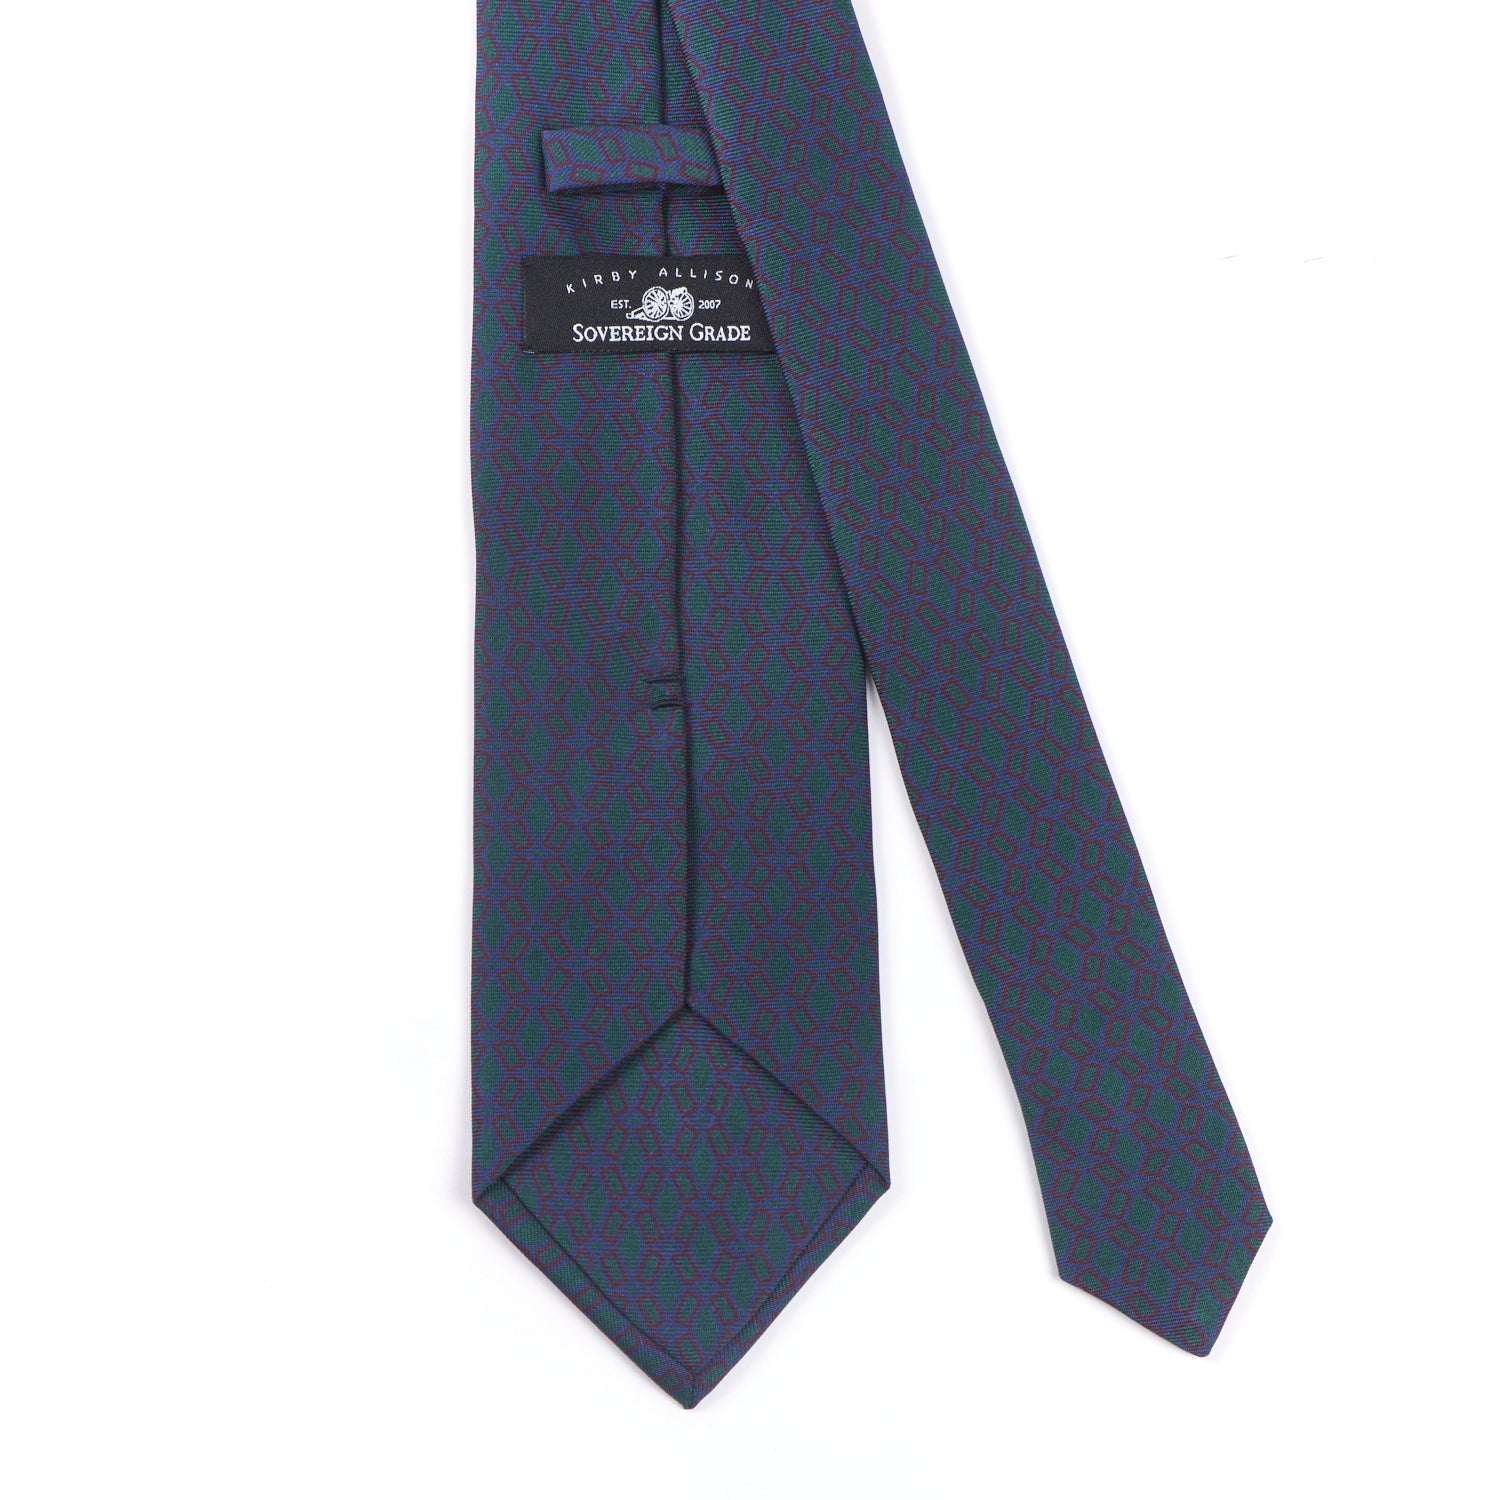 A Sovereign Grade Navy Ancient Madder Tie, 150cm, handmade in the United Kingdom by KirbyAllison.com.